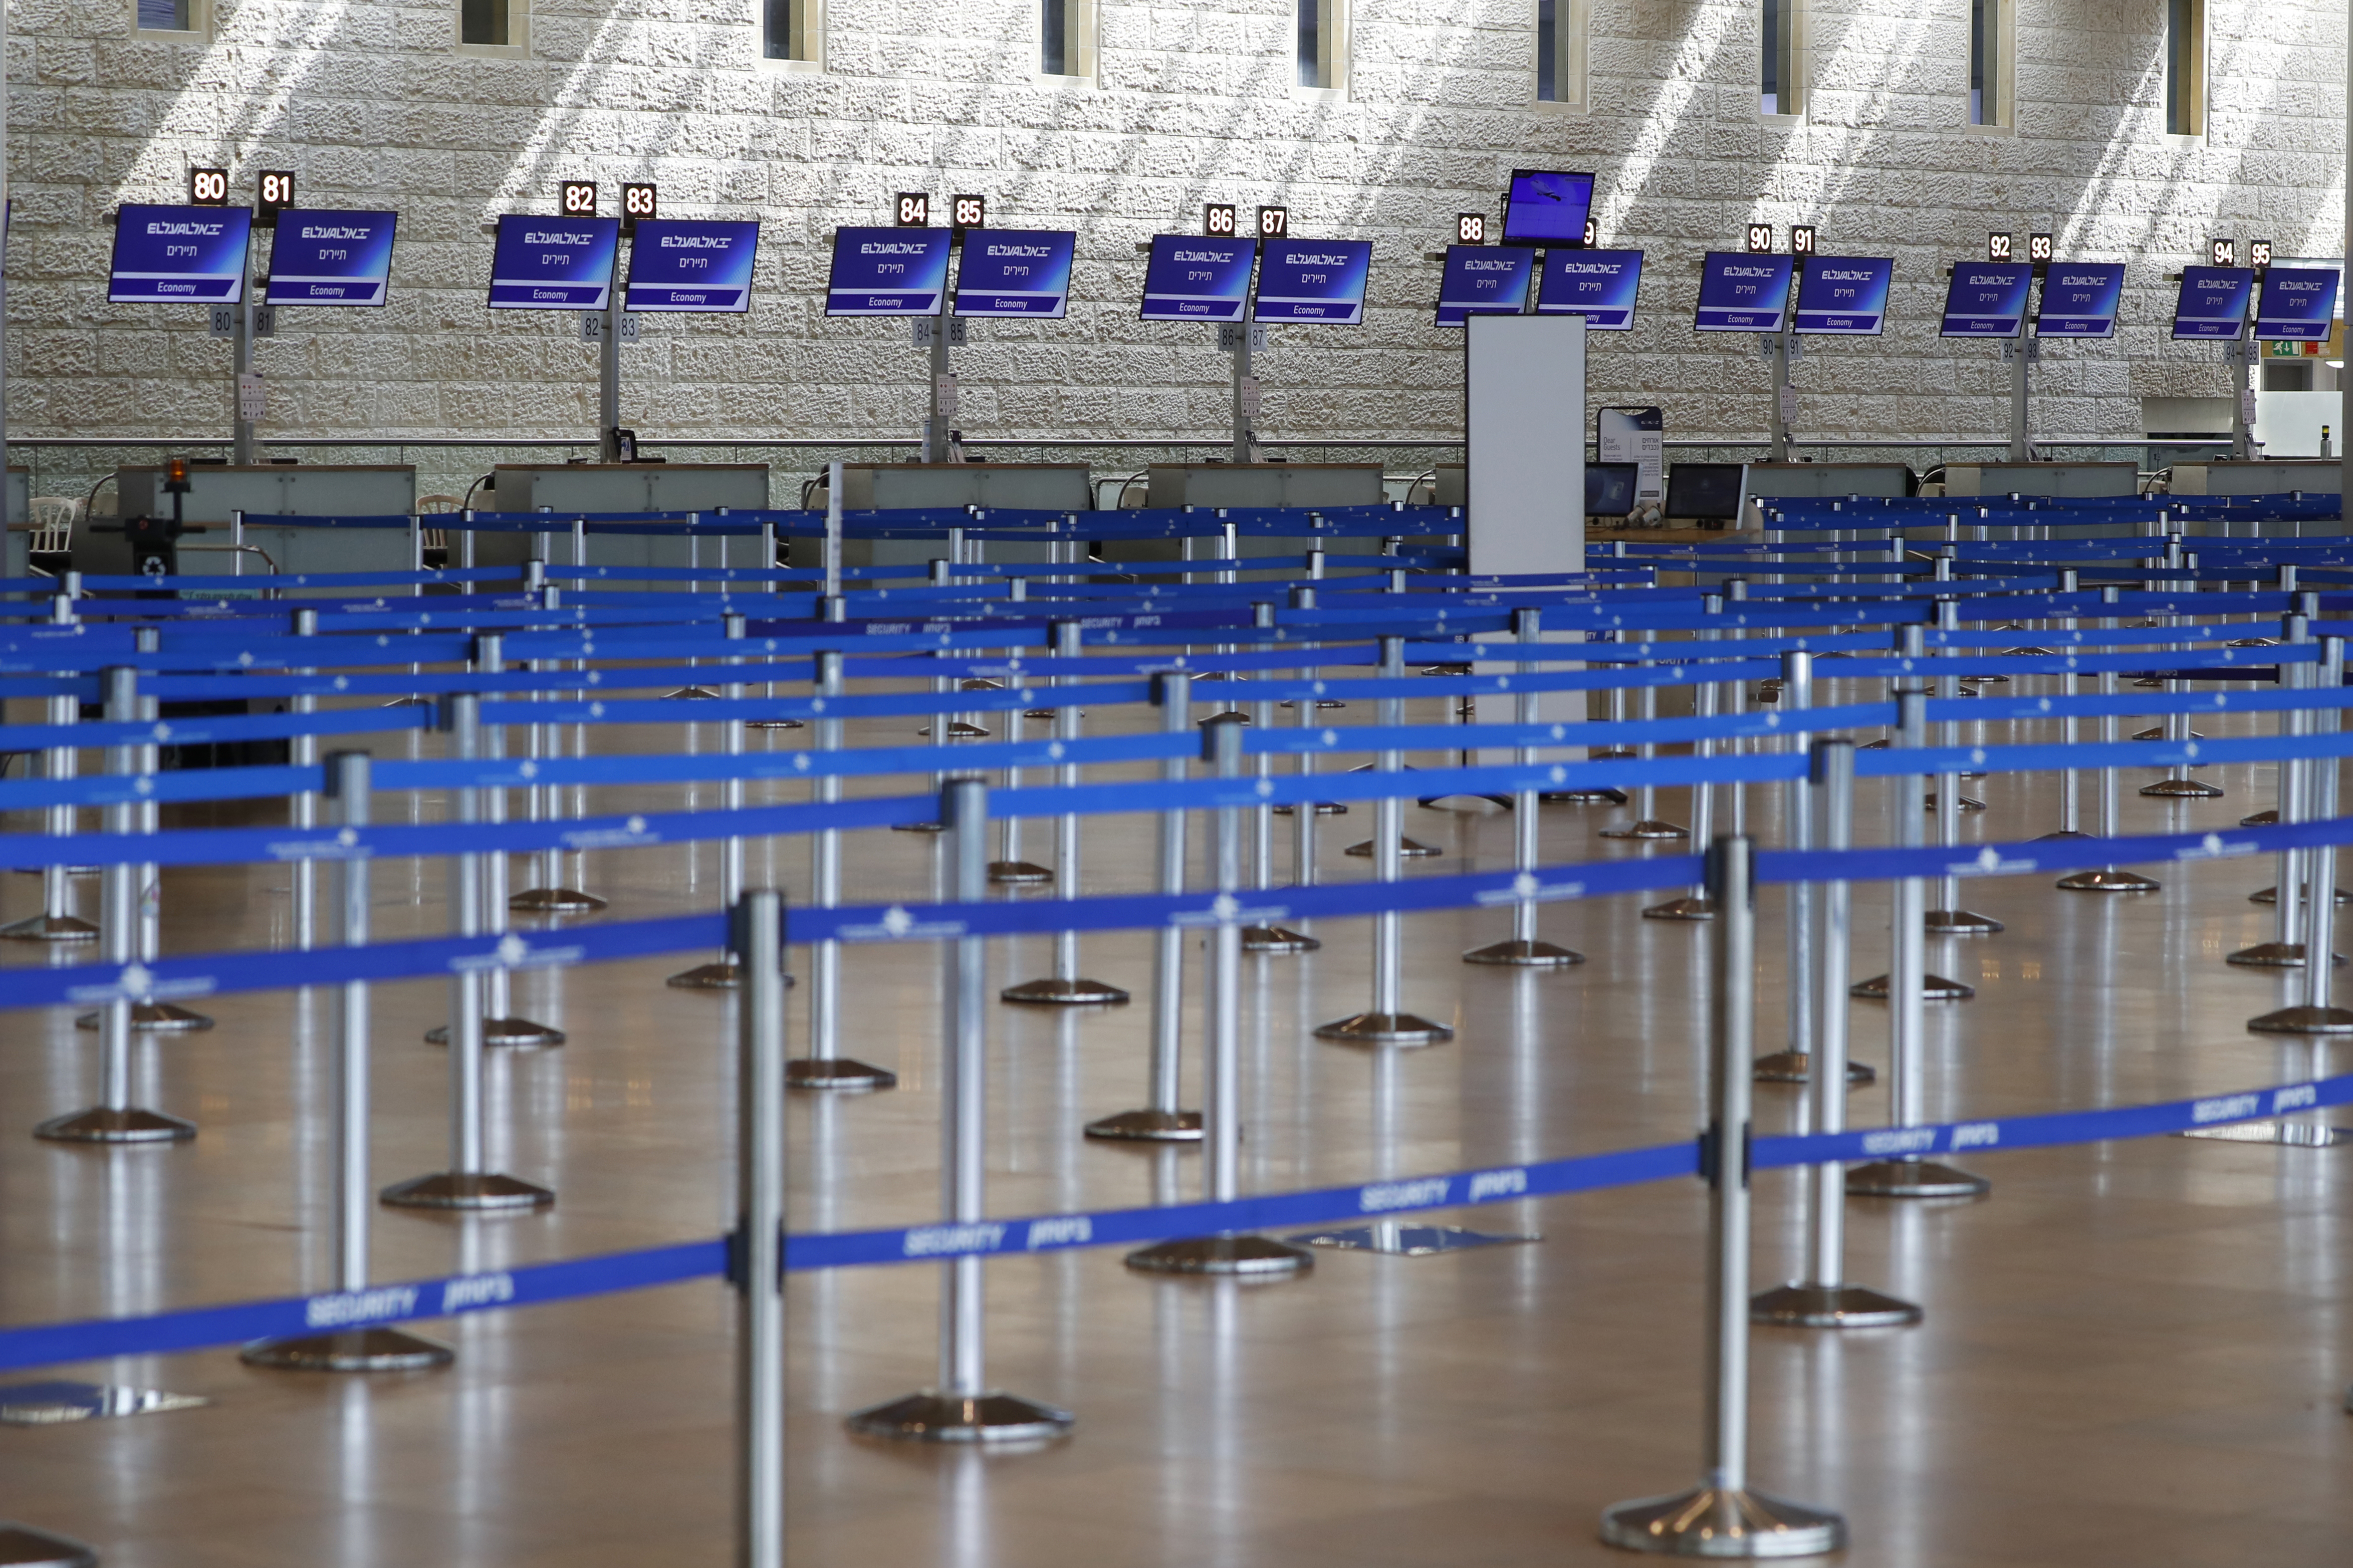 Check-in counters are empty at Ben Gurion International Airport near Tel Aviv, on March 10, 2020 amid major restrictions on travellers from several countries. - Israel imposed a two-week quarantine on all travellers entering the country, Prime Minister Benjamin Netanyahu said, toughening already significant travel restrictions. (Photo by JACK GUEZ / AFP)